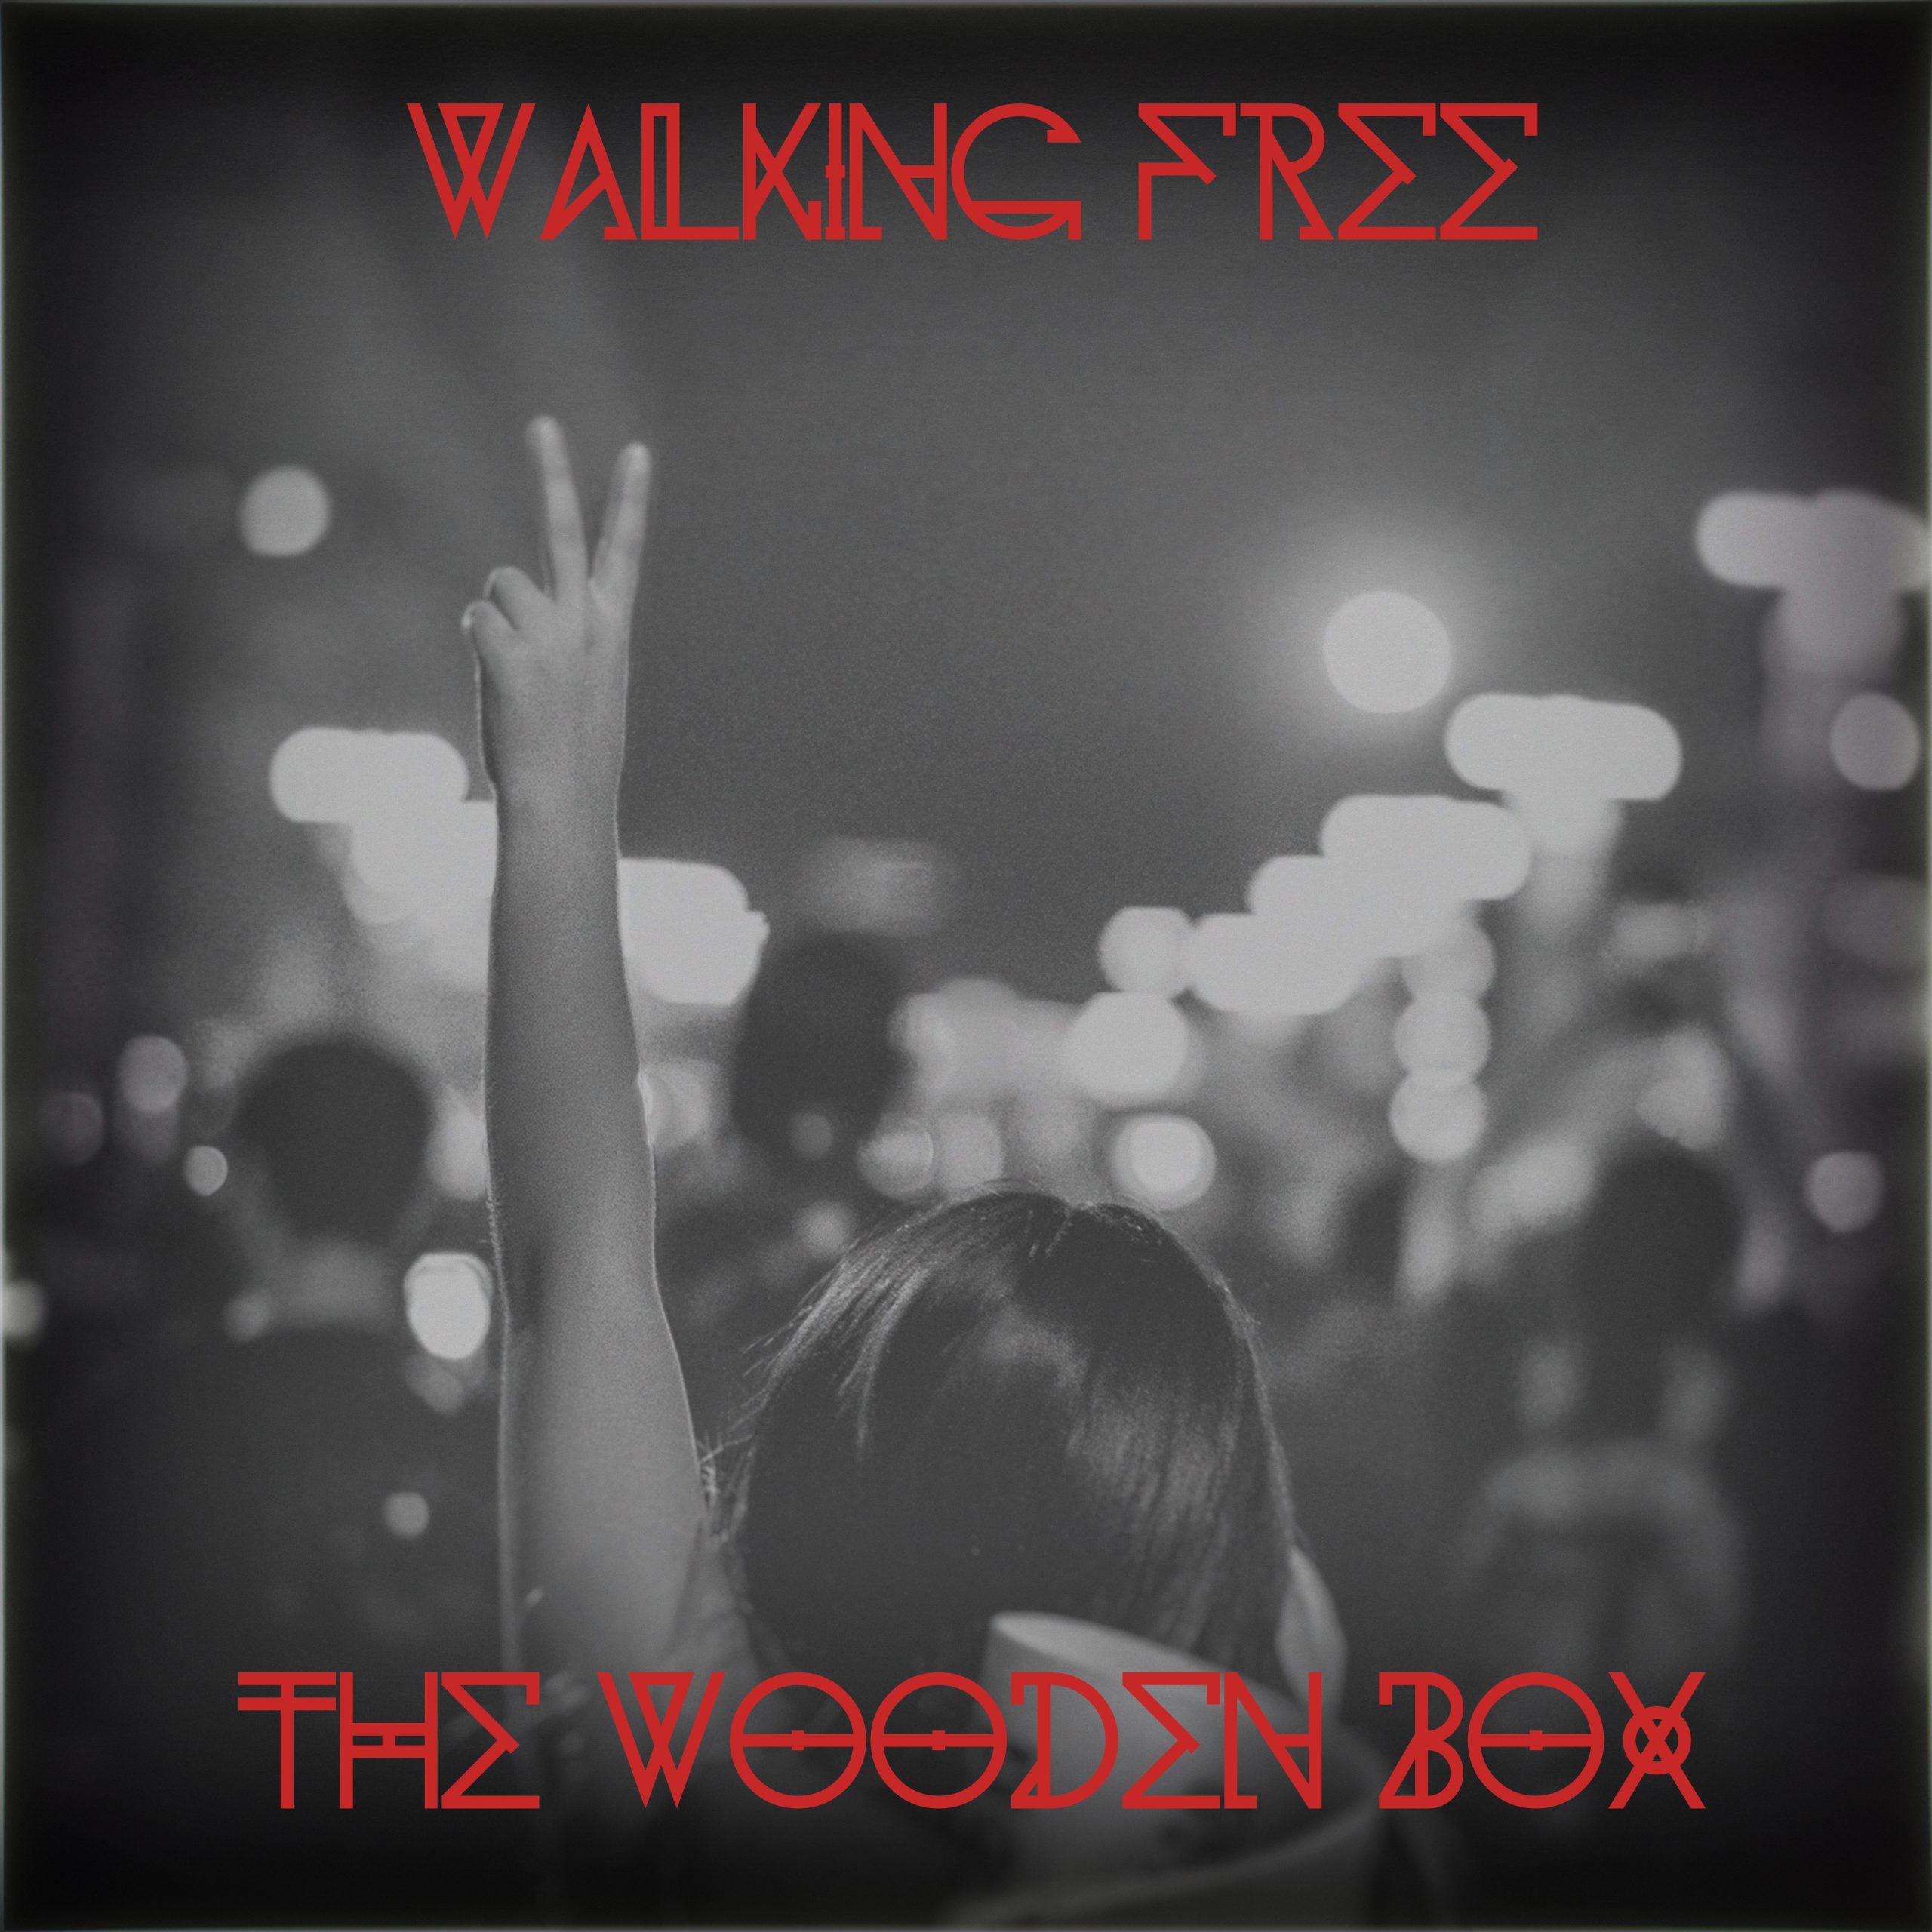 The Wooden Box - Walking Free